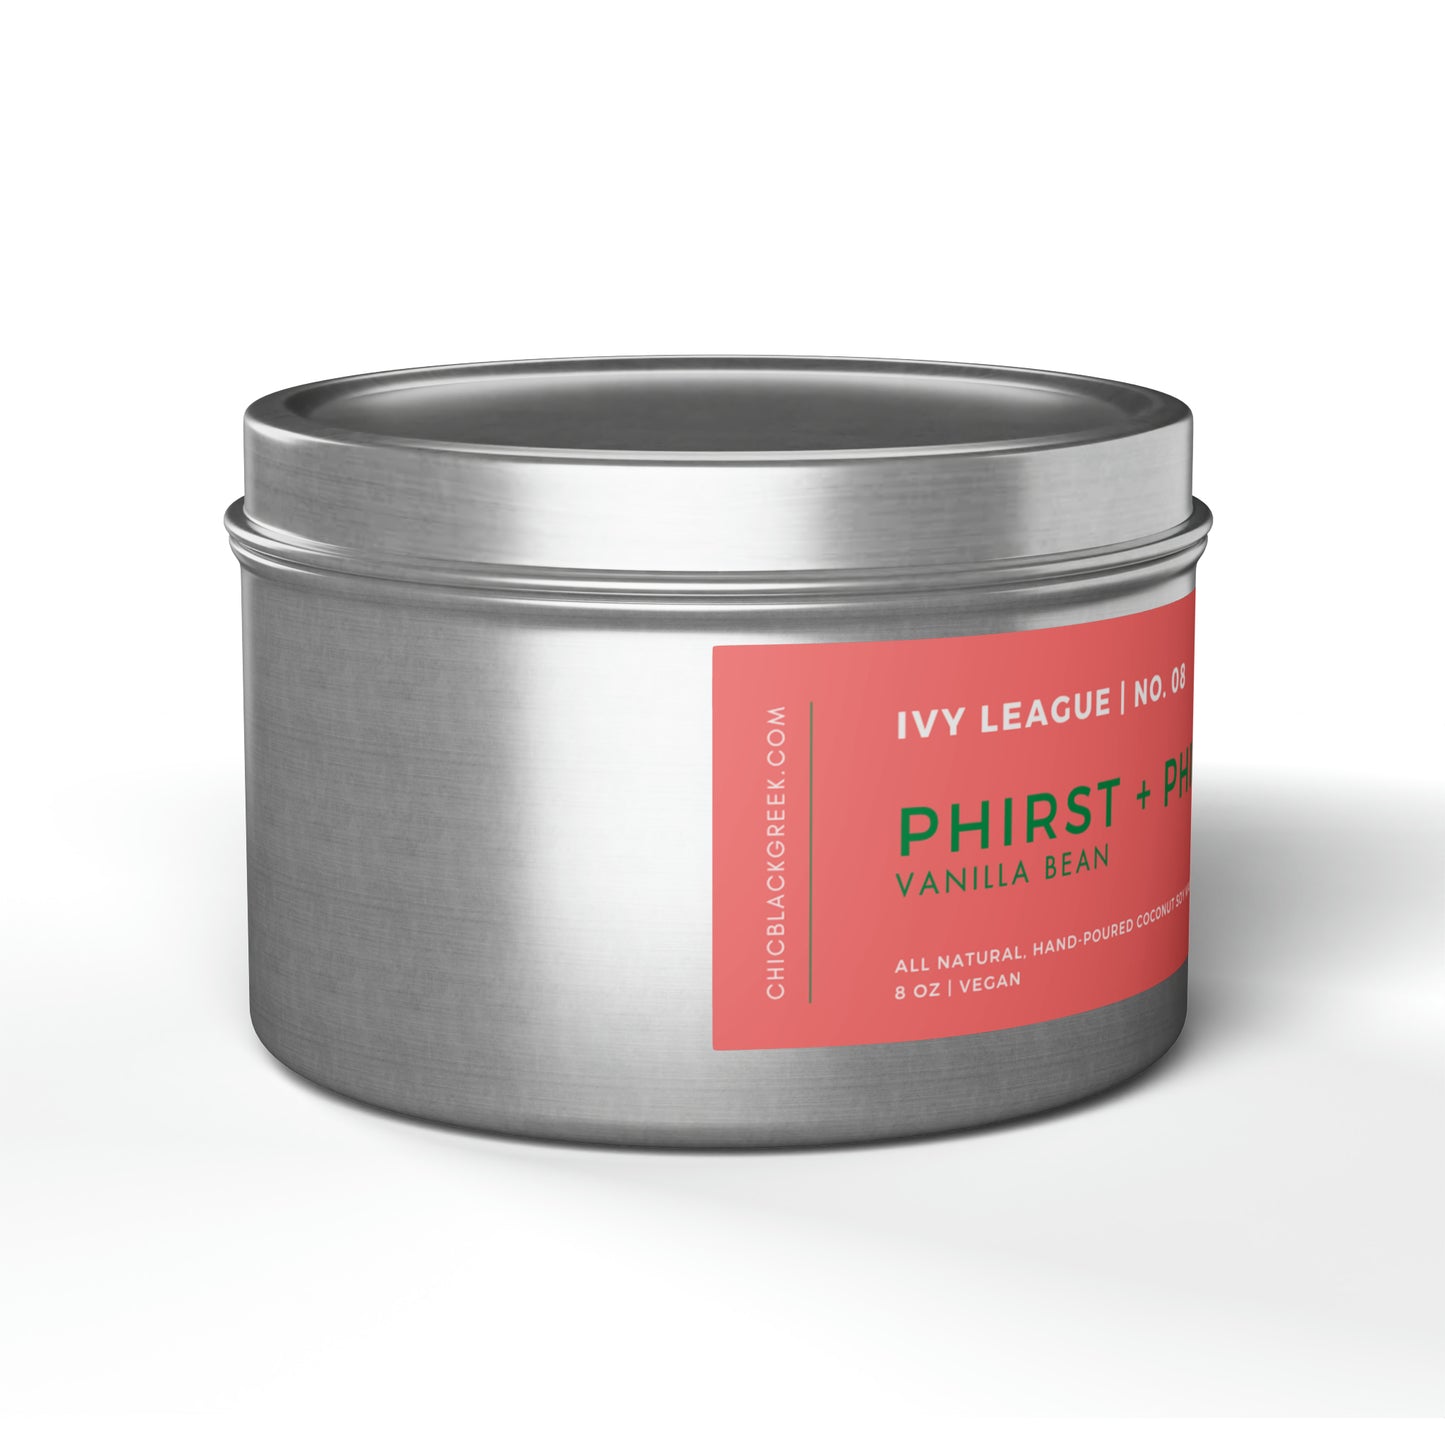 Ivy League No. 08 Phirst + Phinest Candle | Vanilla Bean